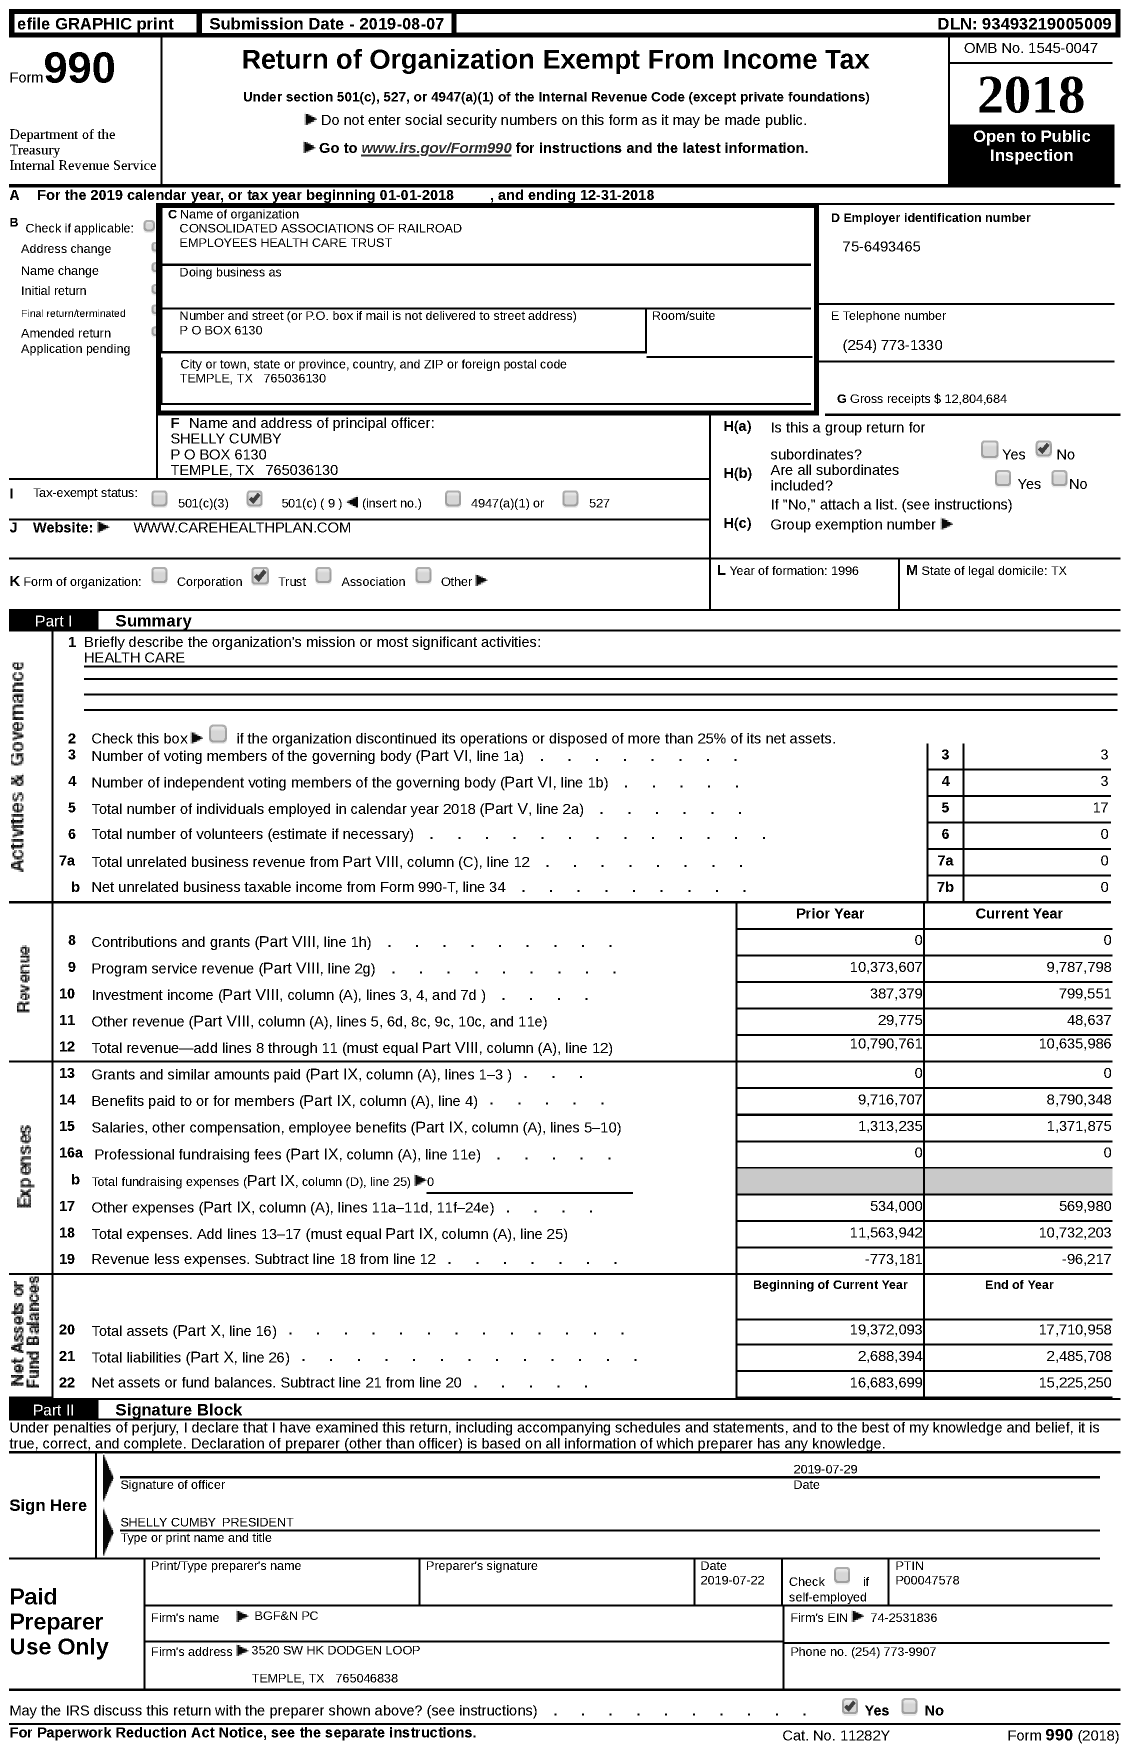 Image of first page of 2018 Form 990 for Consolidated Associations of Railroad Employees Health Care Trust